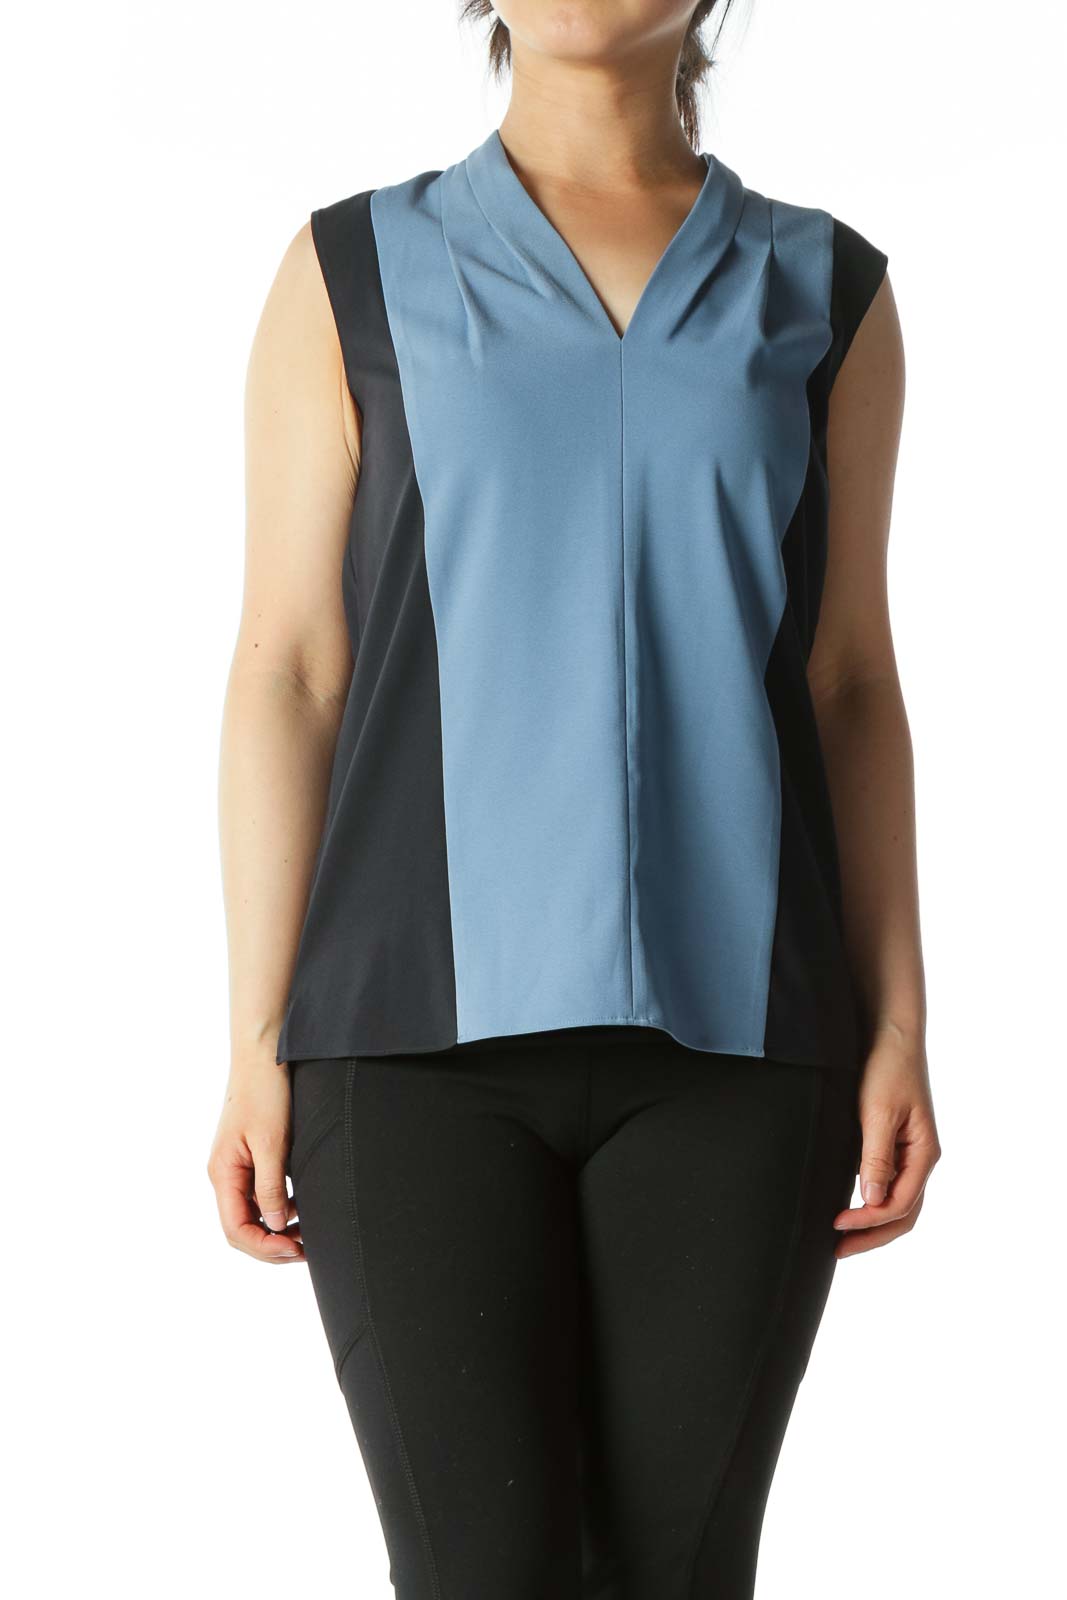 Light Blue and Navy Color-Block V-Neck Sleeveless Blouse Front